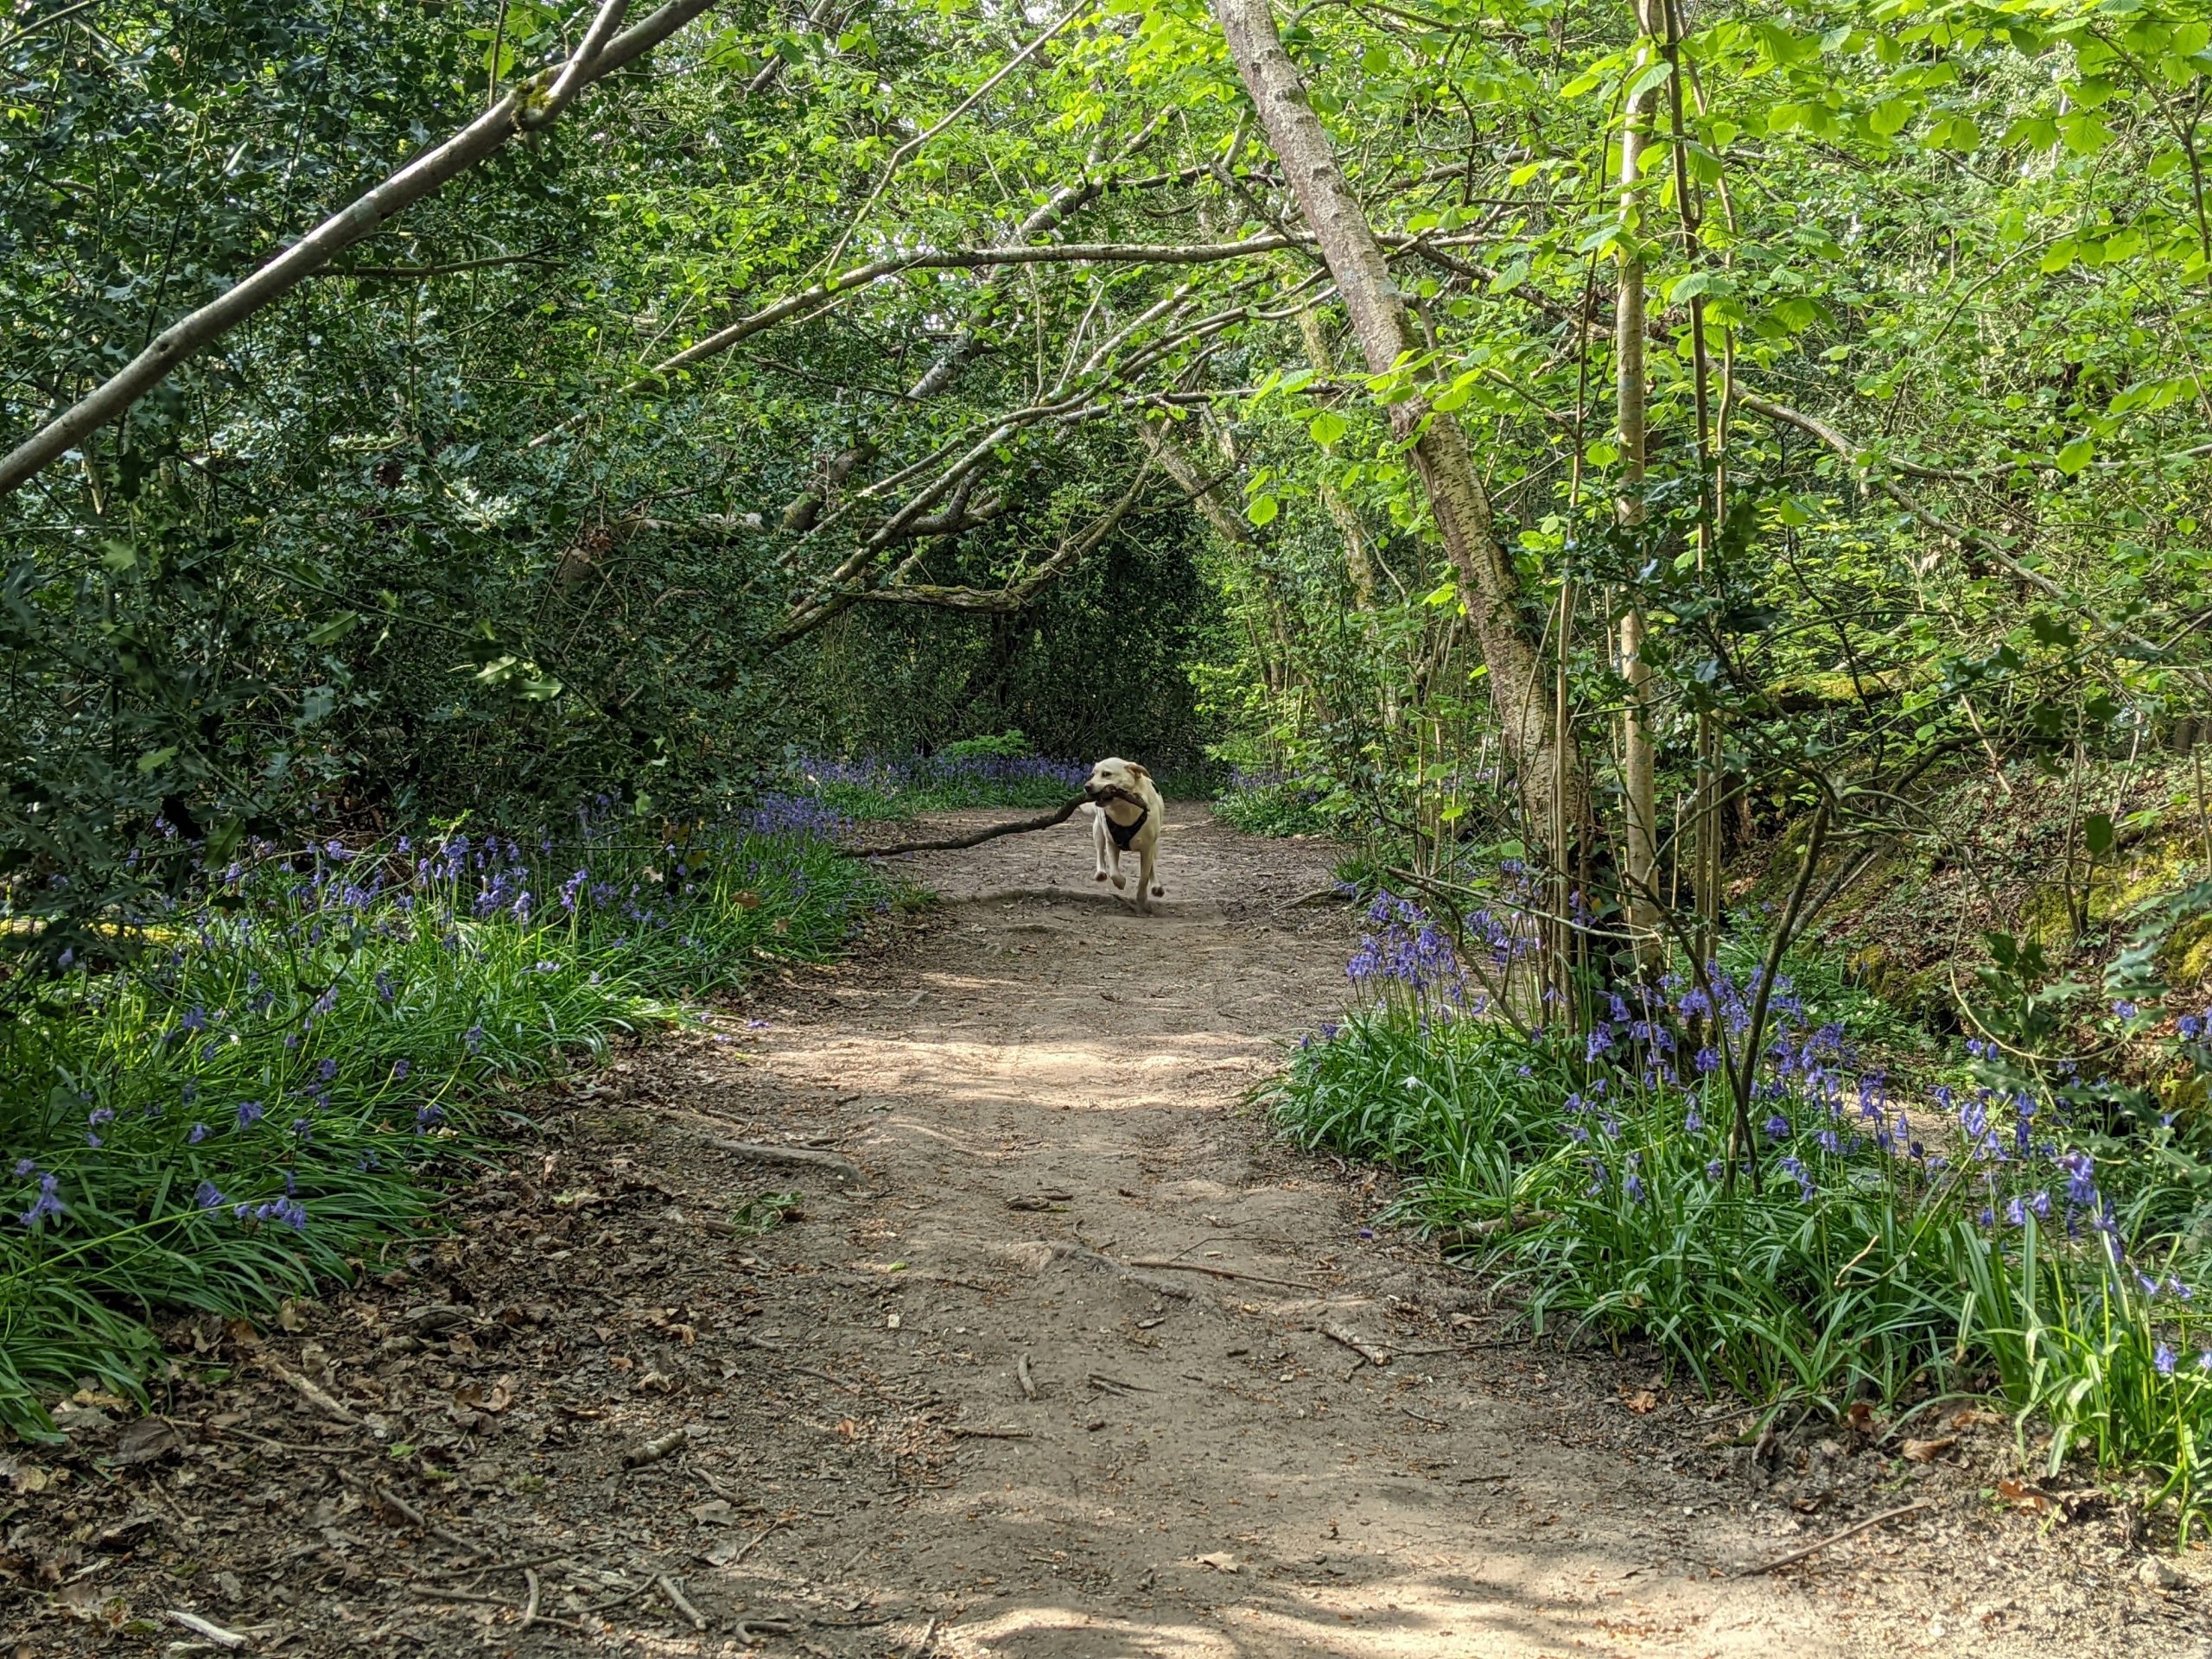 Path leading into woods with Labrador carrying large stick running in distance.